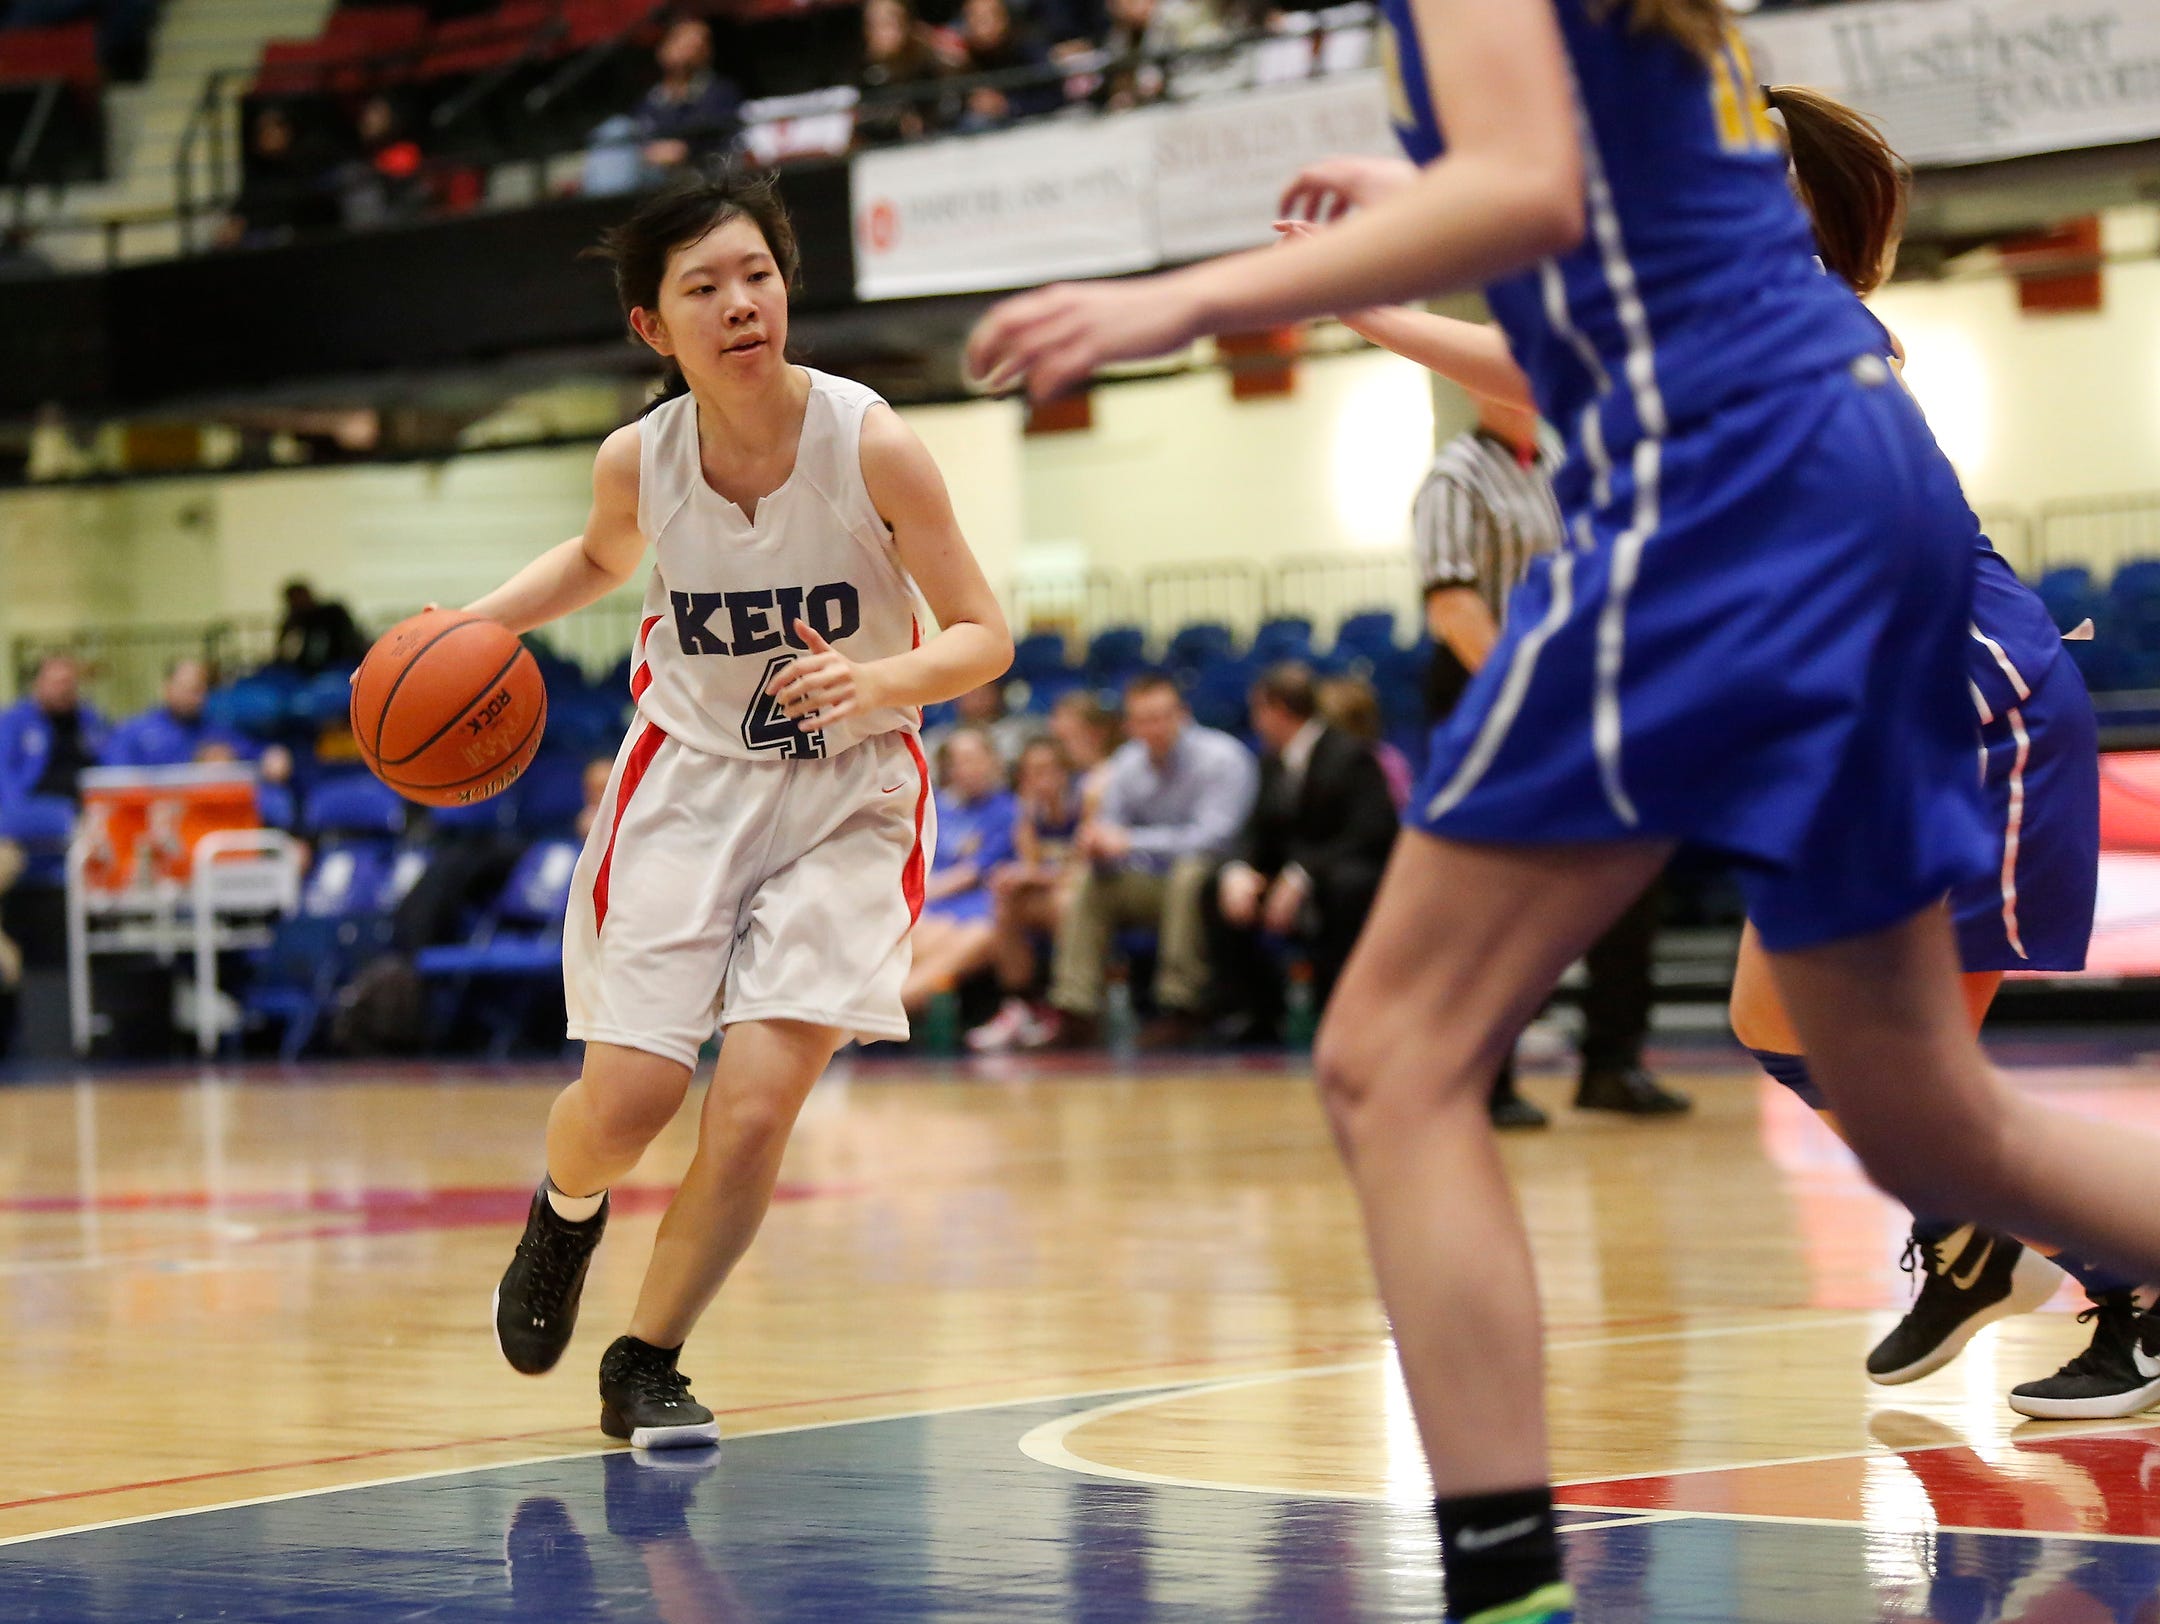 Keio defeats North Salem 46-31 in the class C semi-final basketball game at the Westchester County Center in White Plains on Saturday, February 27, 2016.